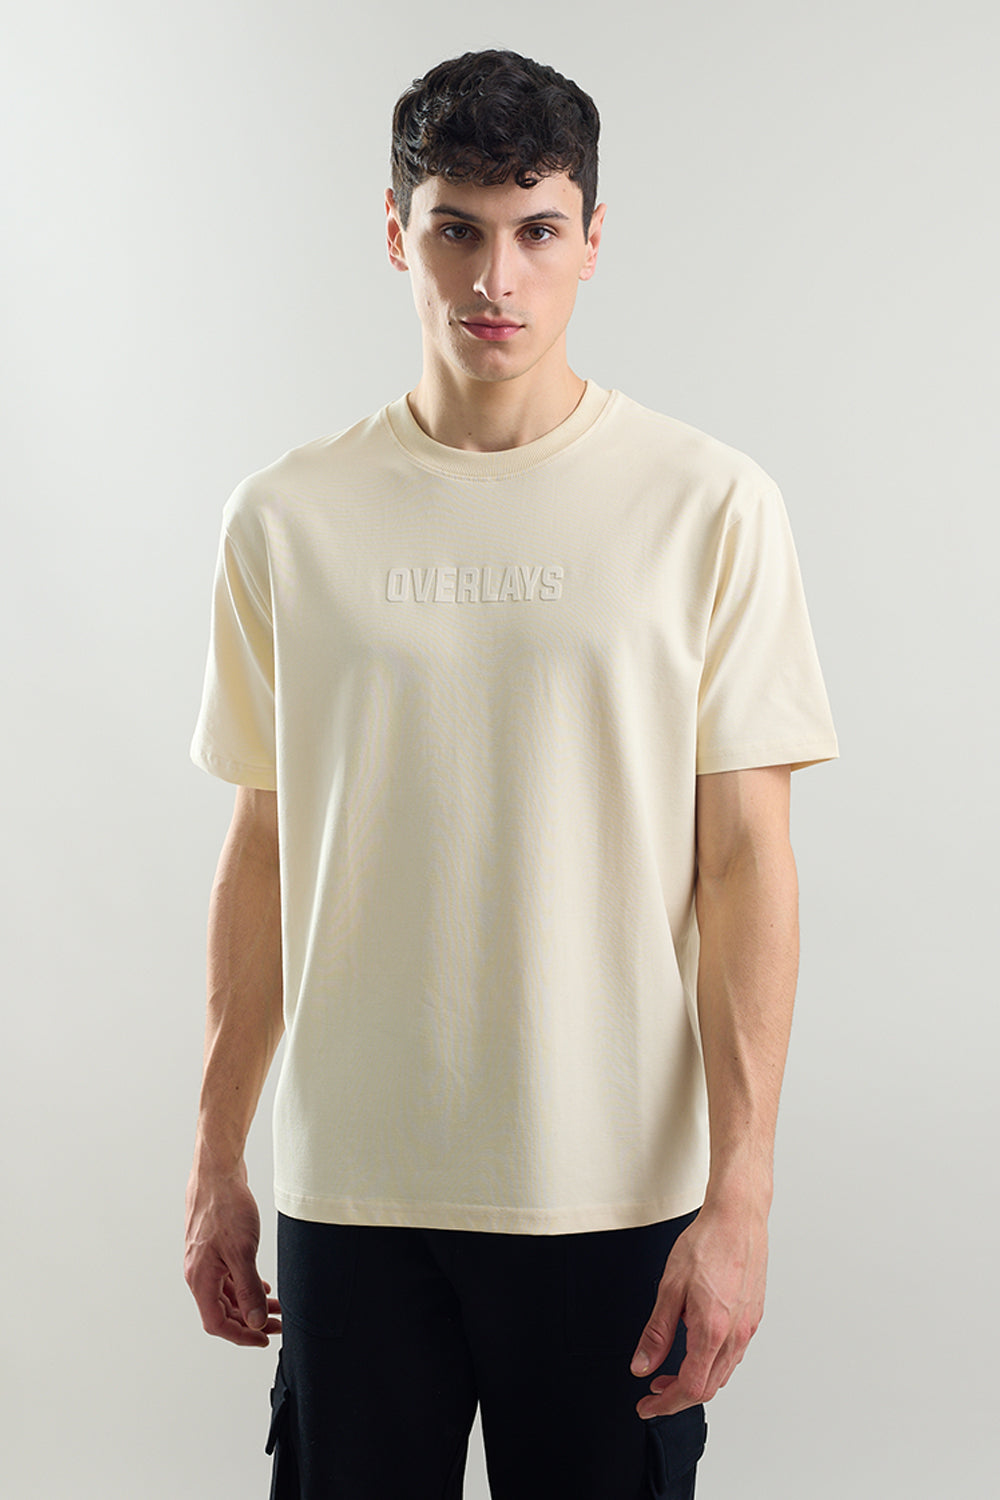 The Amber Bloom Relaxed Fit T-shirt - Ultra Soft